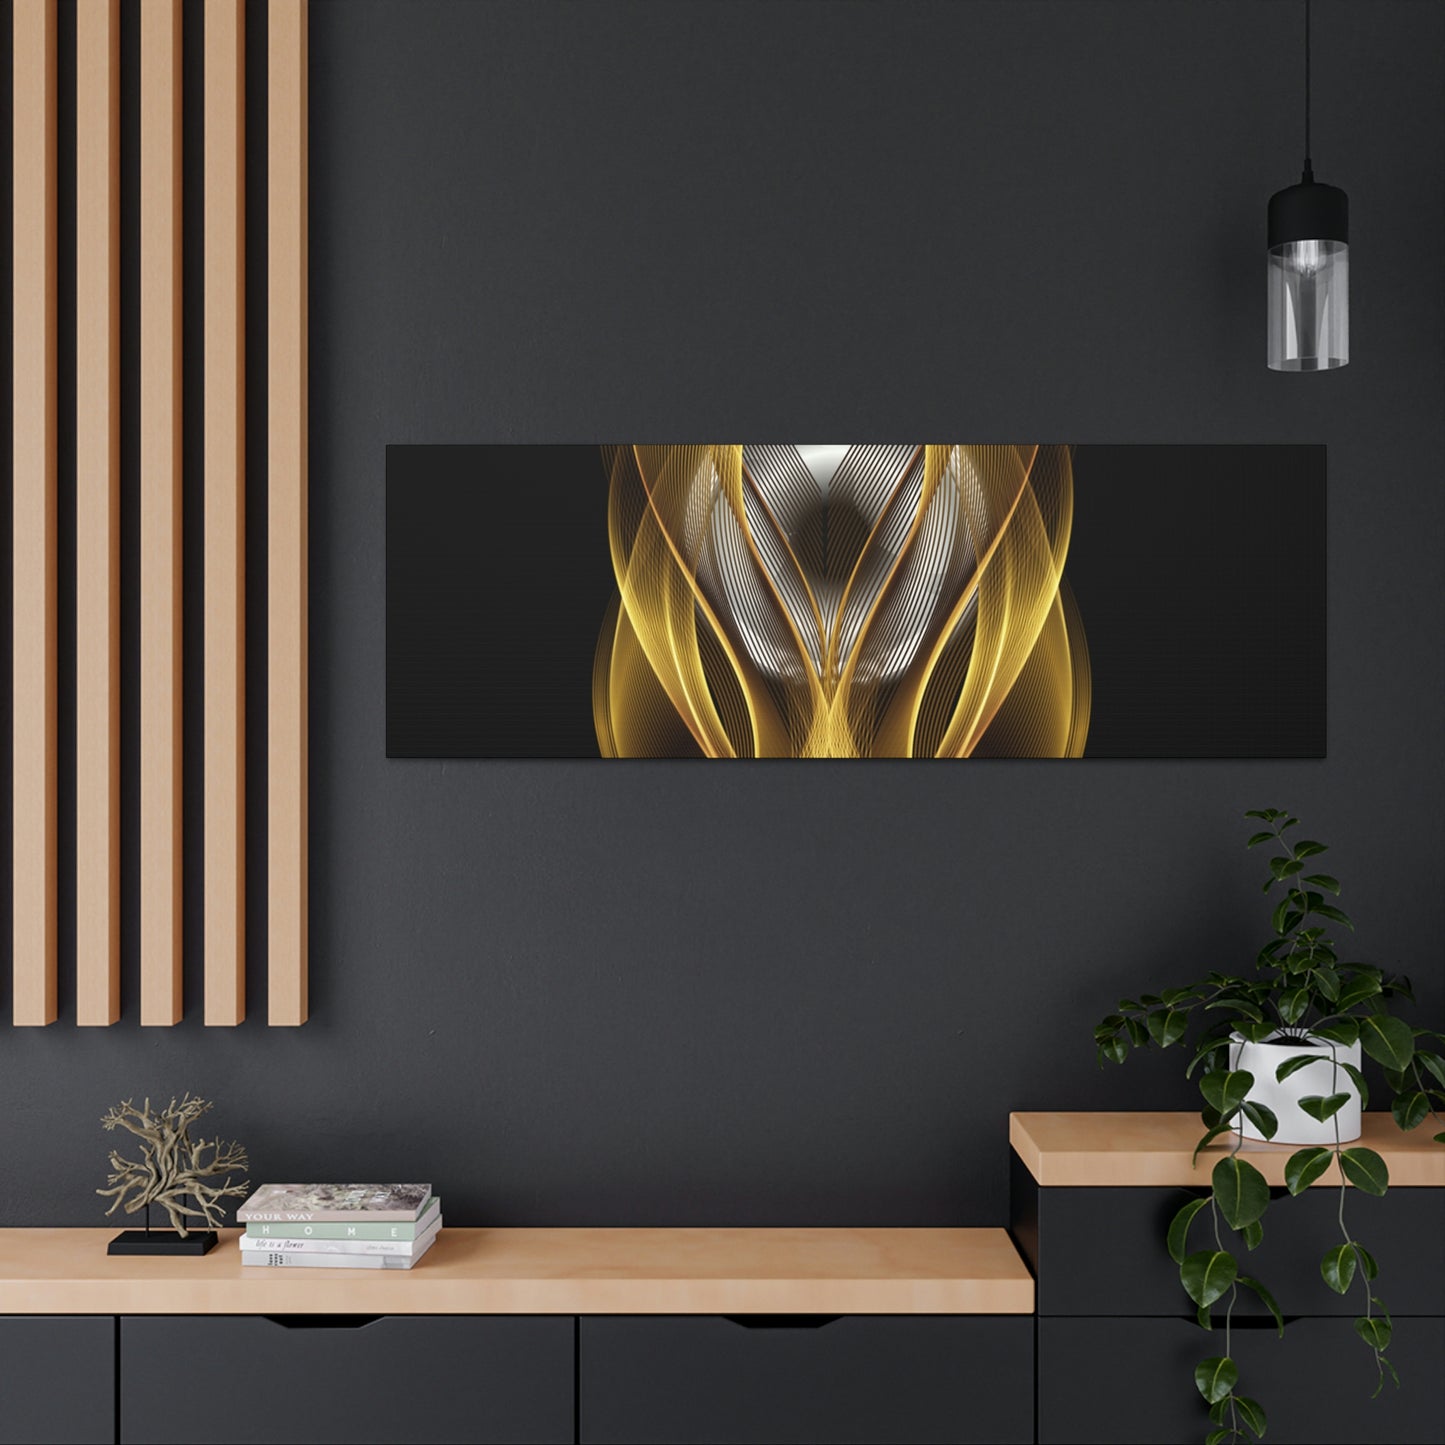 Home Decor Custom Wall ART | Canvas Frame Gold and Black Print | Painting Poster | Abstract Design | Modern Home Office Wall Frame | Firelin